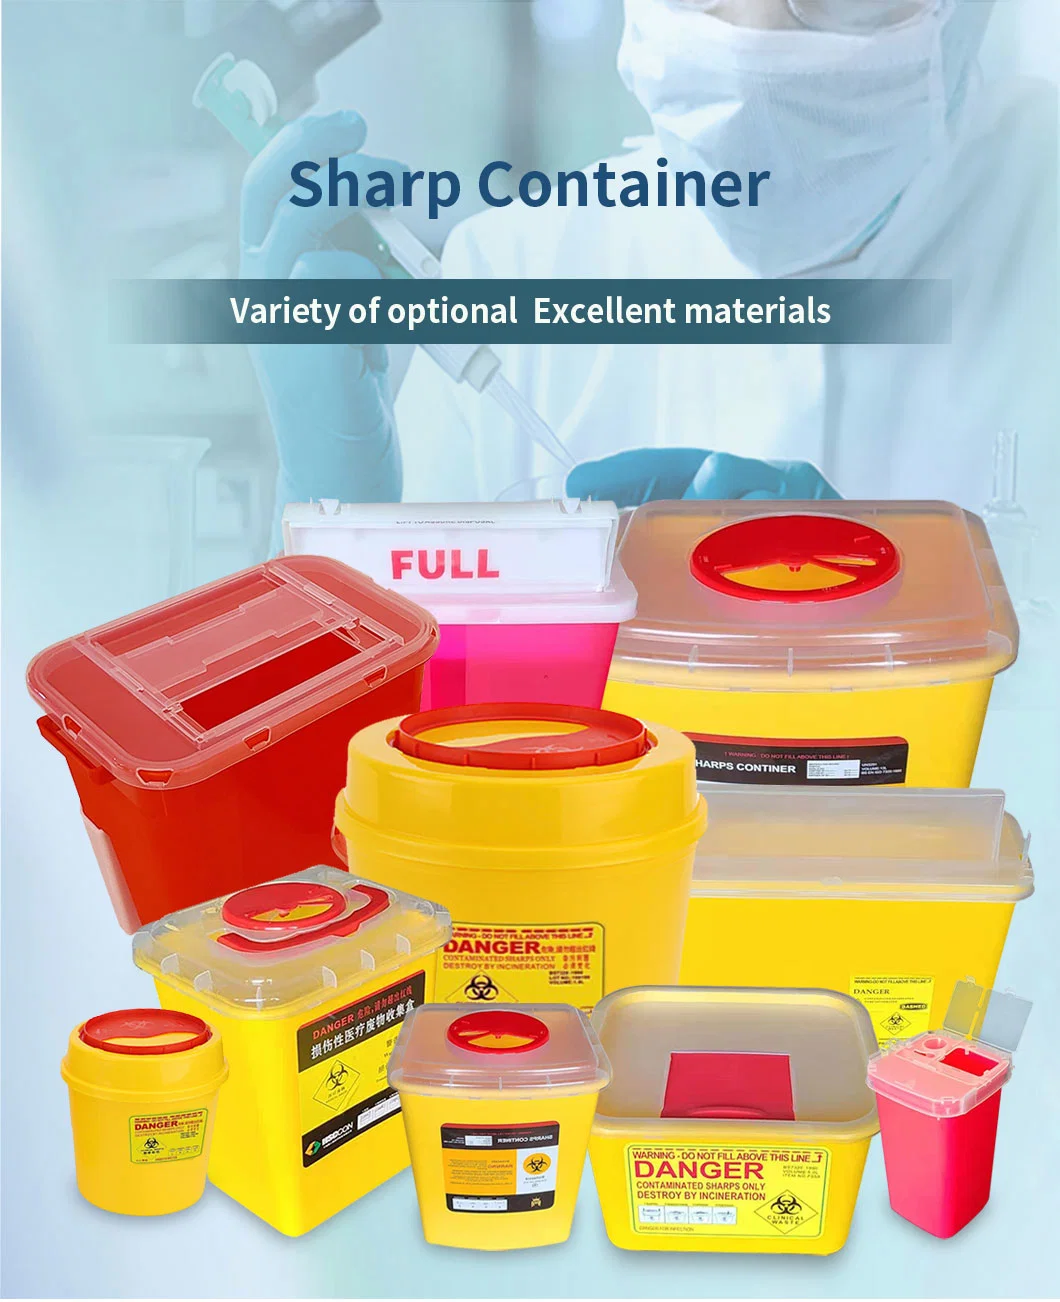 1L/3L/4L/5L/6L/8L/10L/15 Liter Yellow Red Waterproof Safety Plastic Disposable Needle Waste Biohazard Hospital Round/Squre Medical Sharp Container with Lid